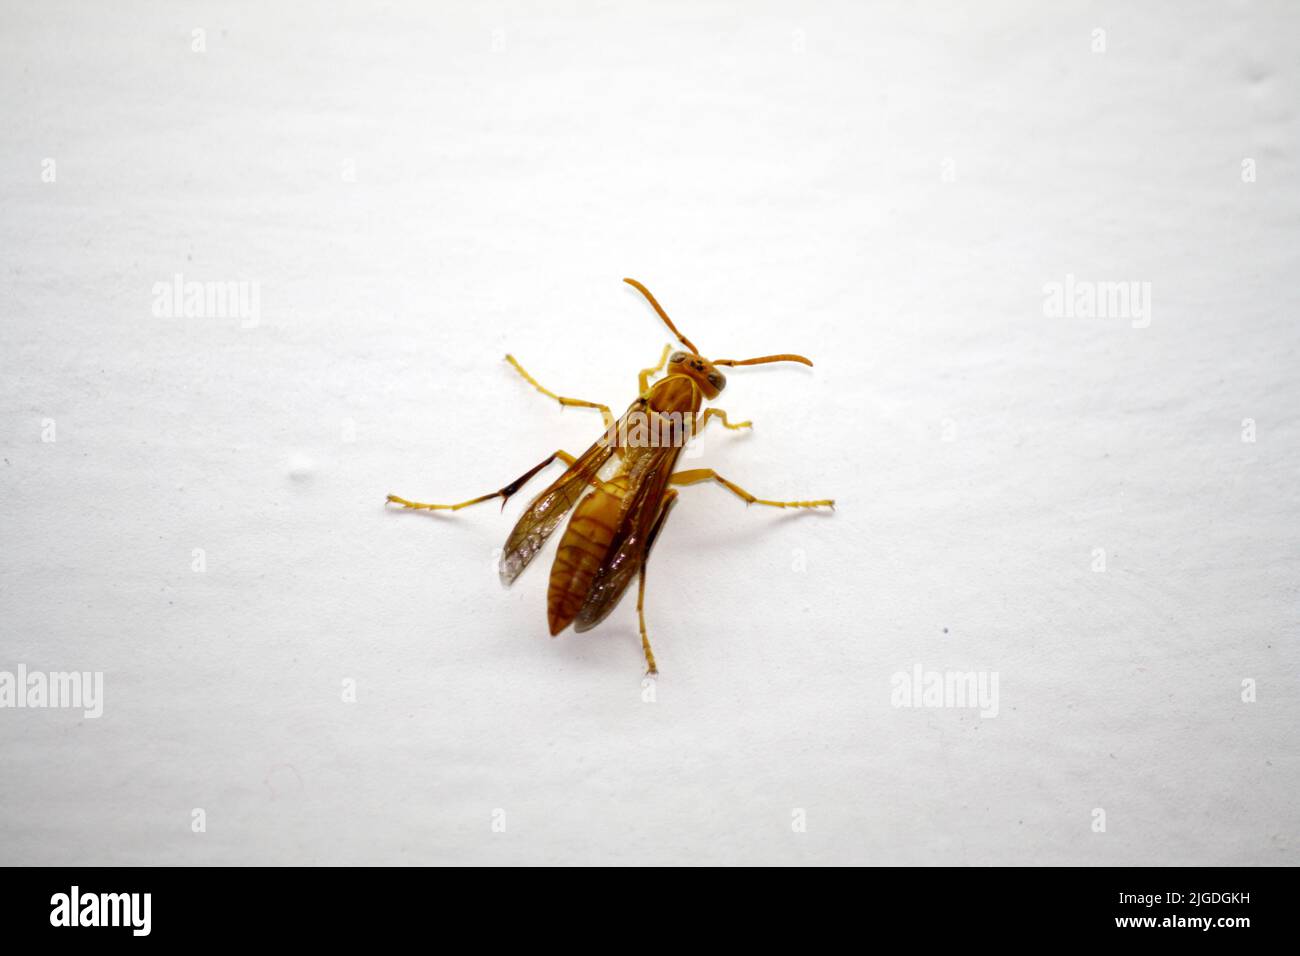 An Indian Yellow Paper Wasp (Polistes olivaceus) on a window pane : (pix SShukla) Stock Photo